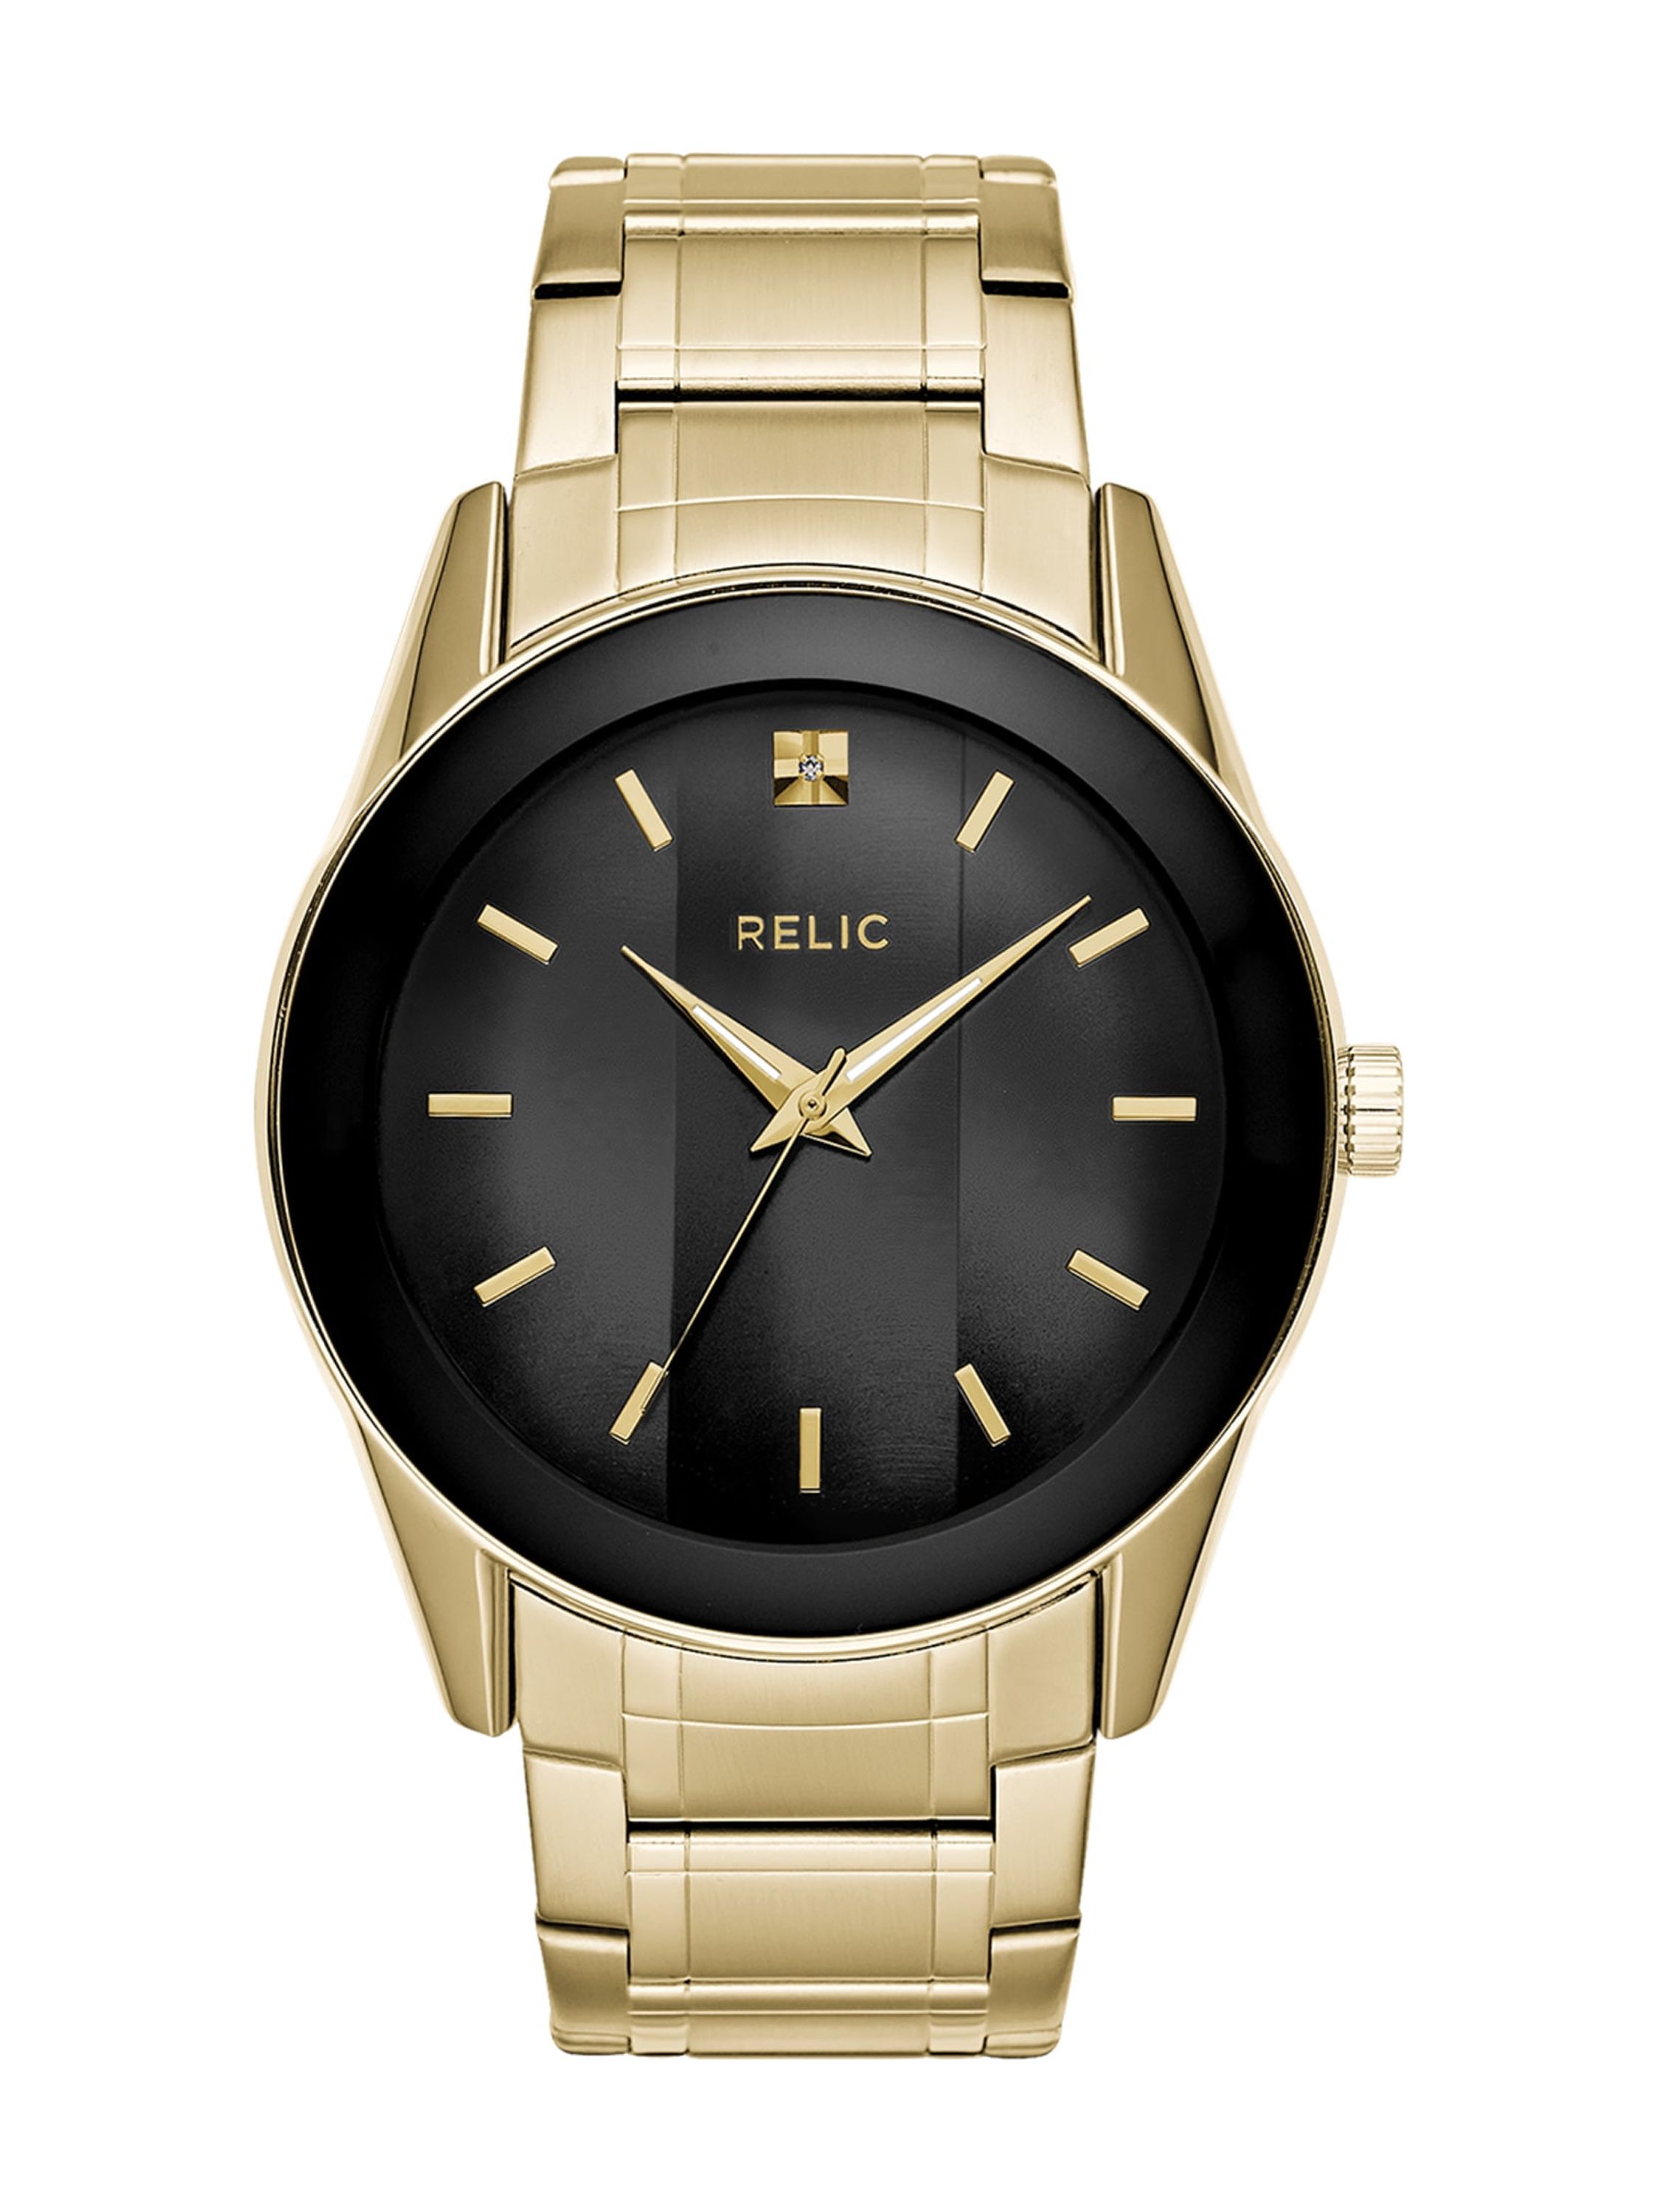 Relic By Fossil Men's Rylan Gold Stainless Steel Diamond Accent Watch with Matching Band - image 1 of 5